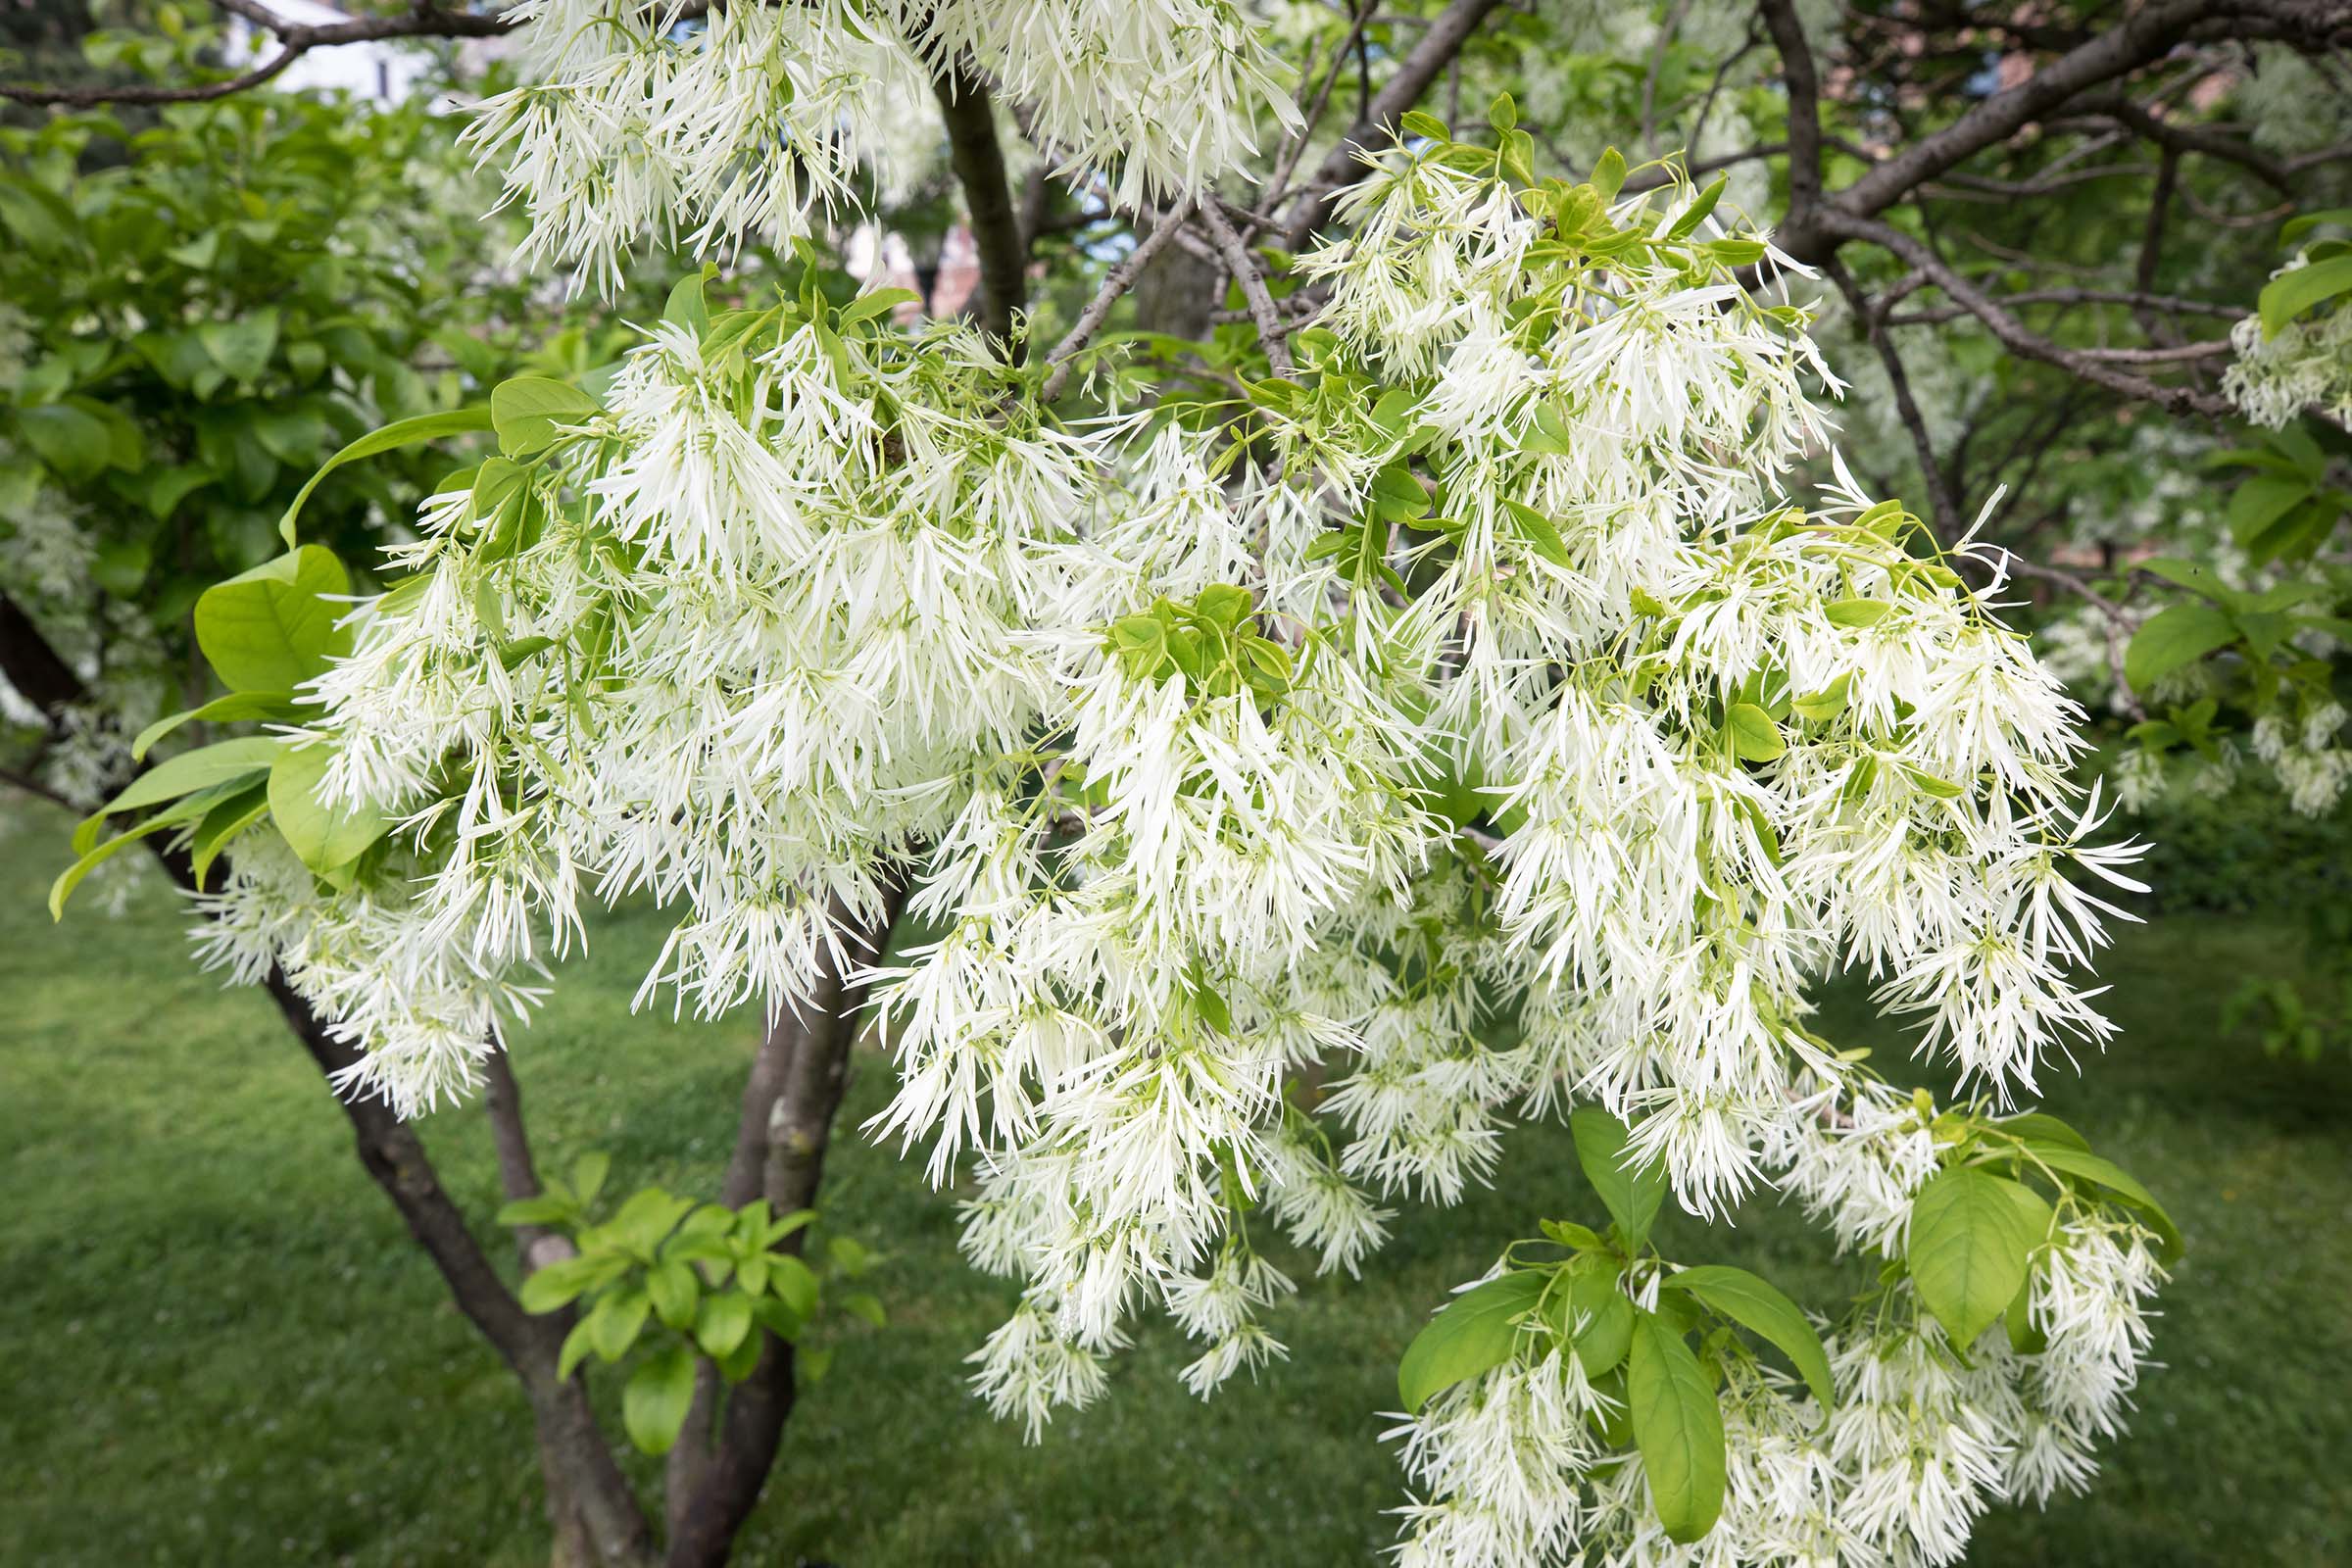 The white blossoms on the fringe trees dangle in the wind